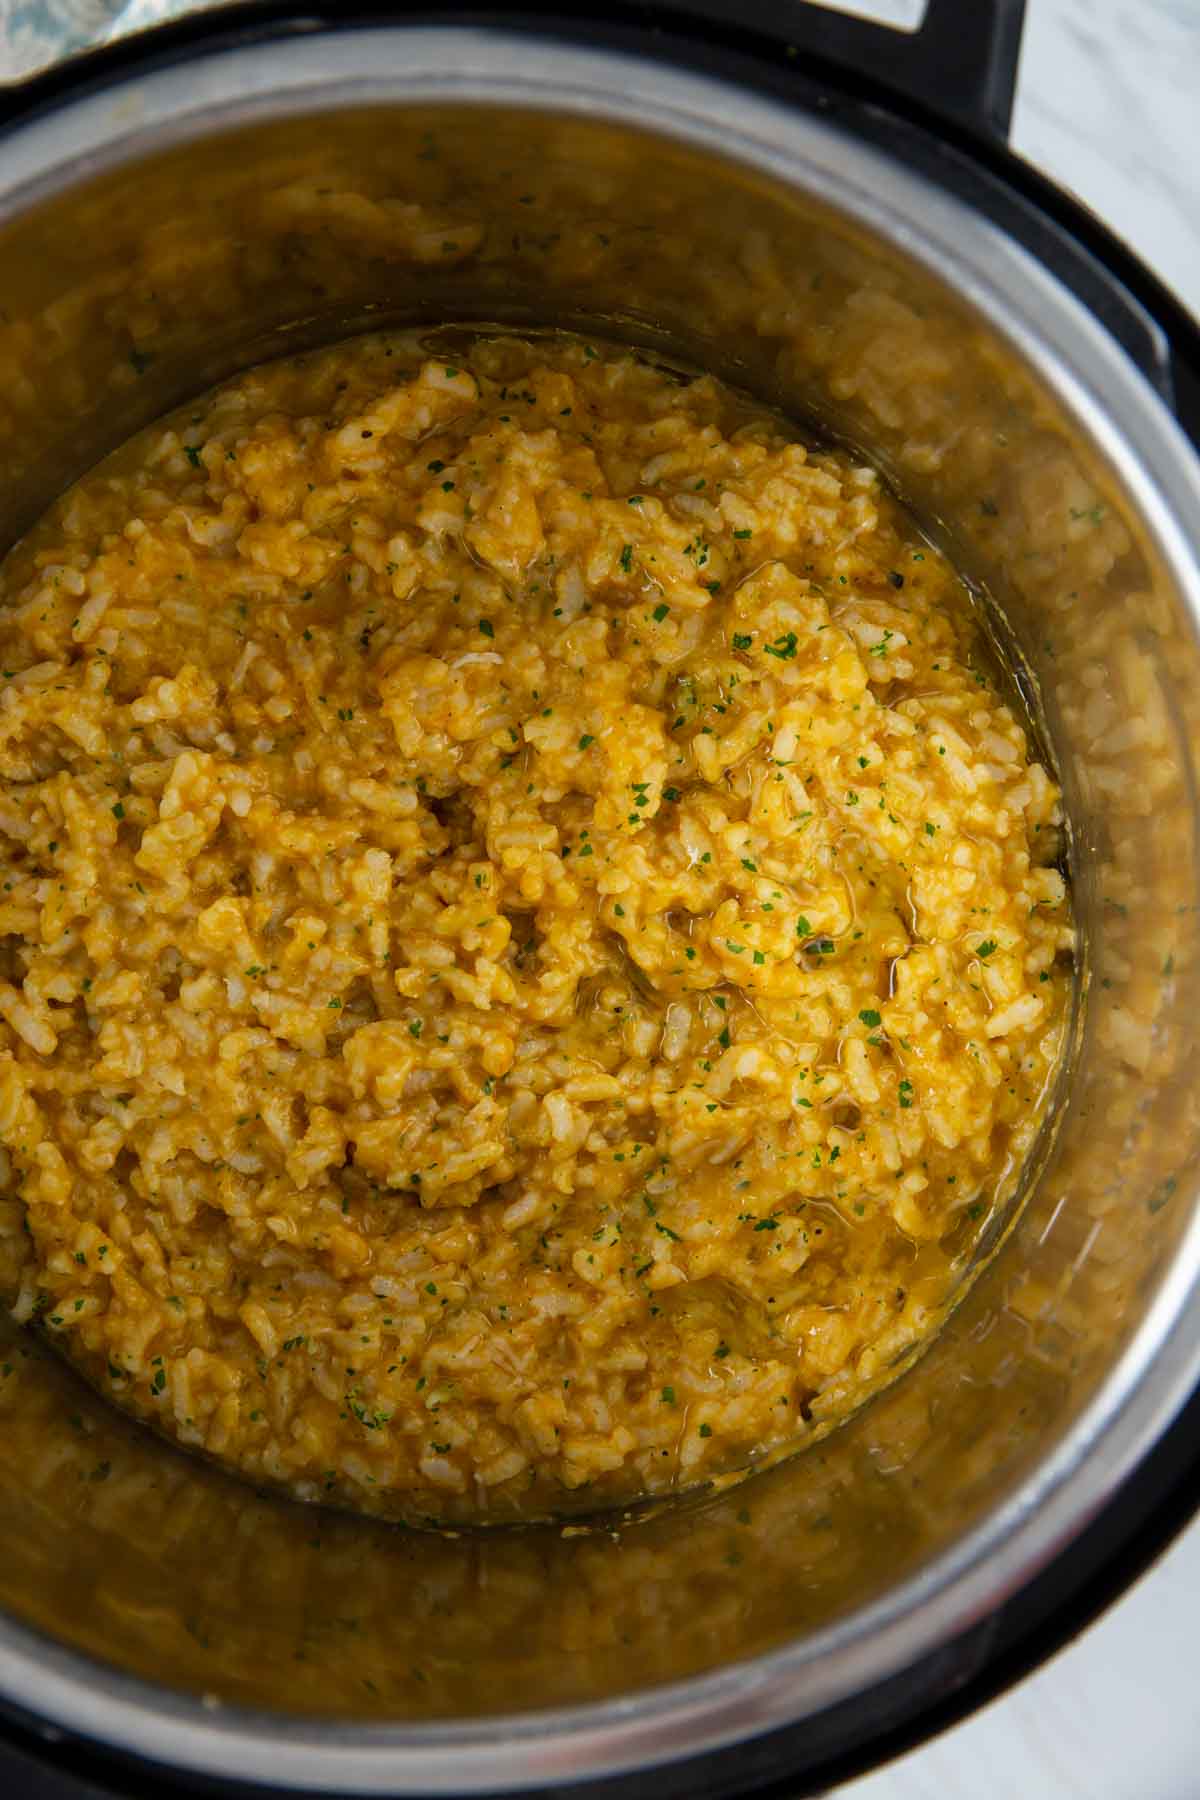 Instant Pot Pumpkin risotto is ready to serve.